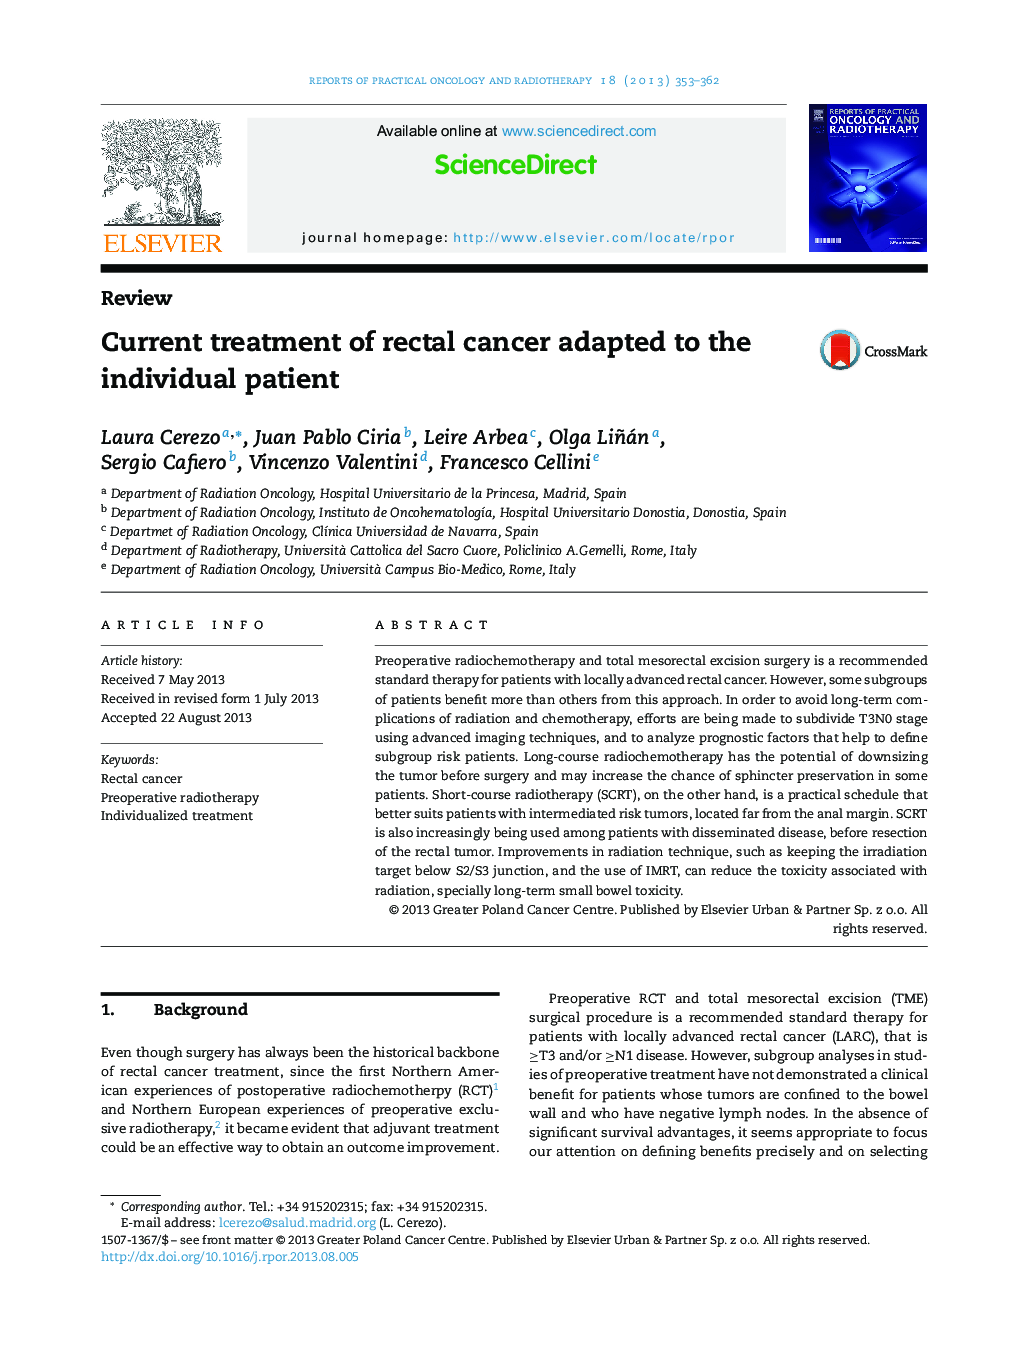 Current treatment of rectal cancer adapted to the individual patient